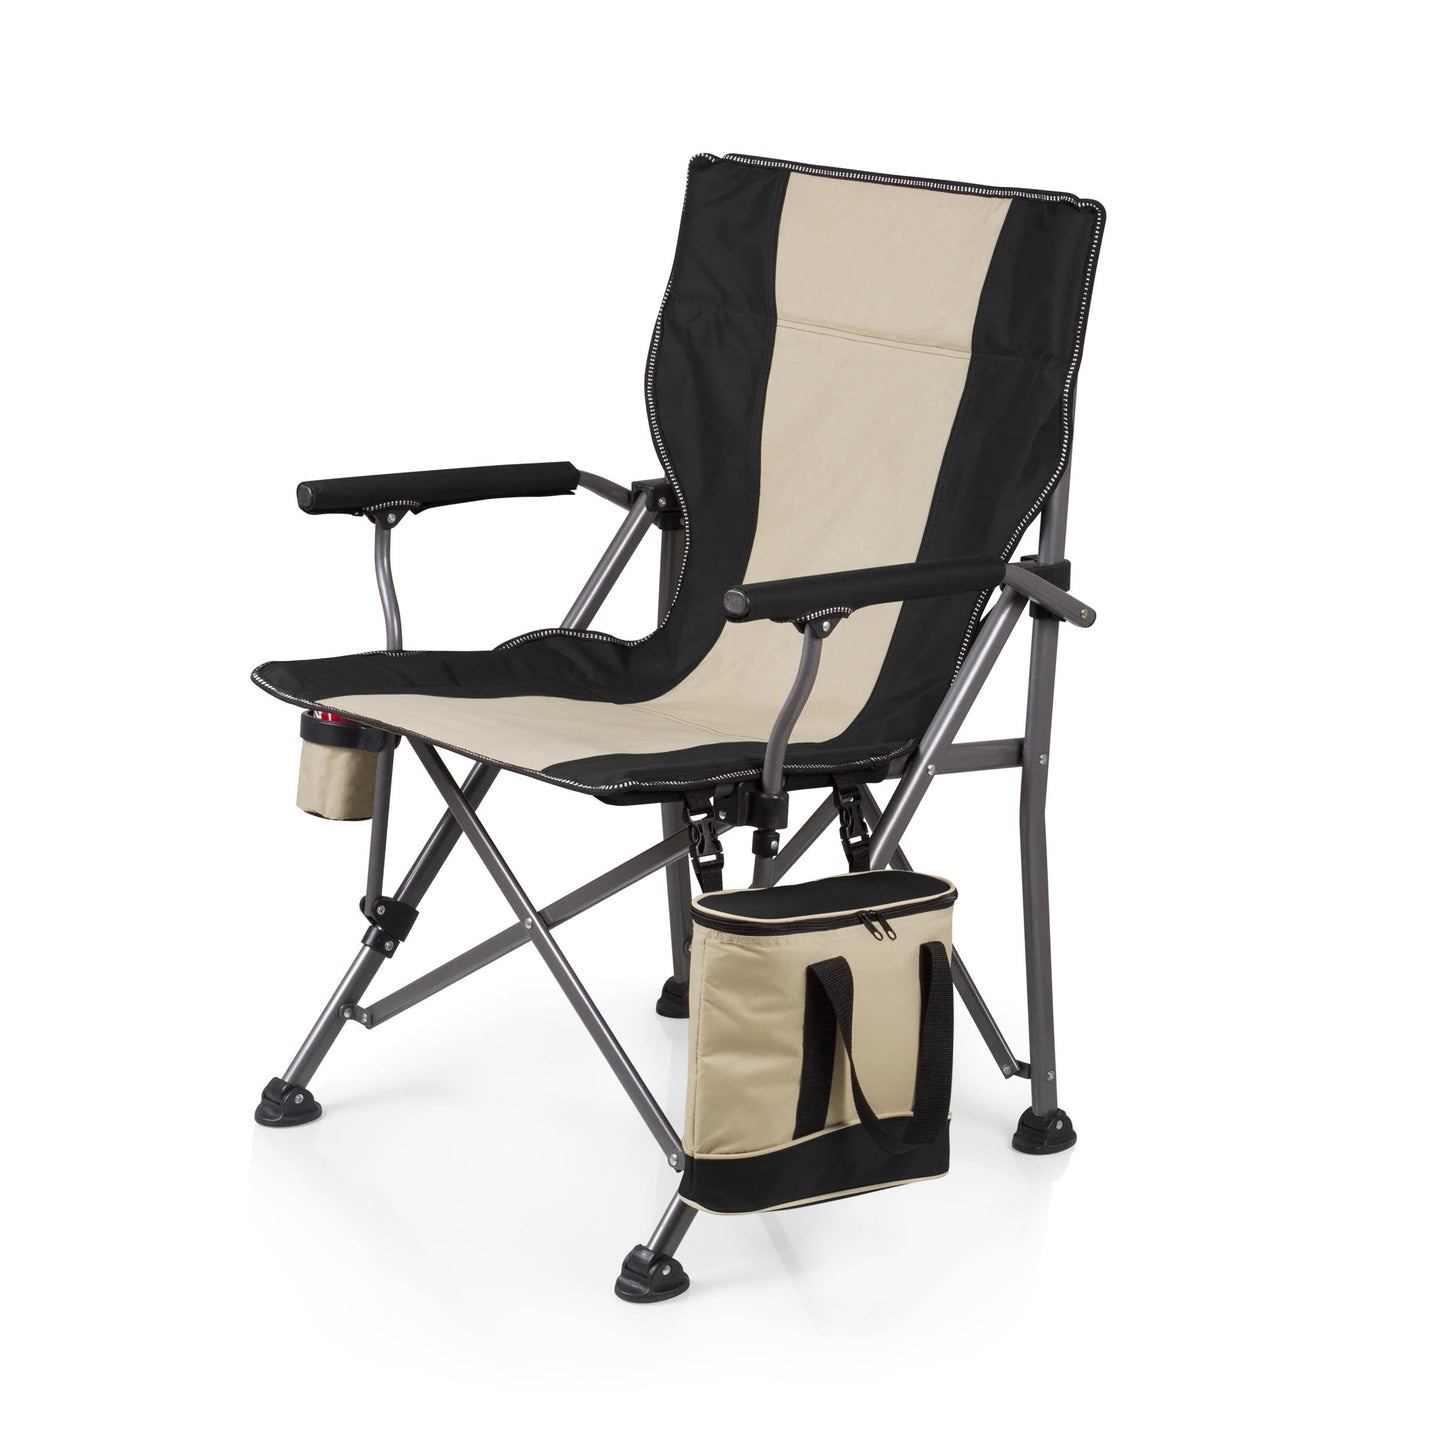 New York Jets - Outlander Folding Camping Chair with Cooler